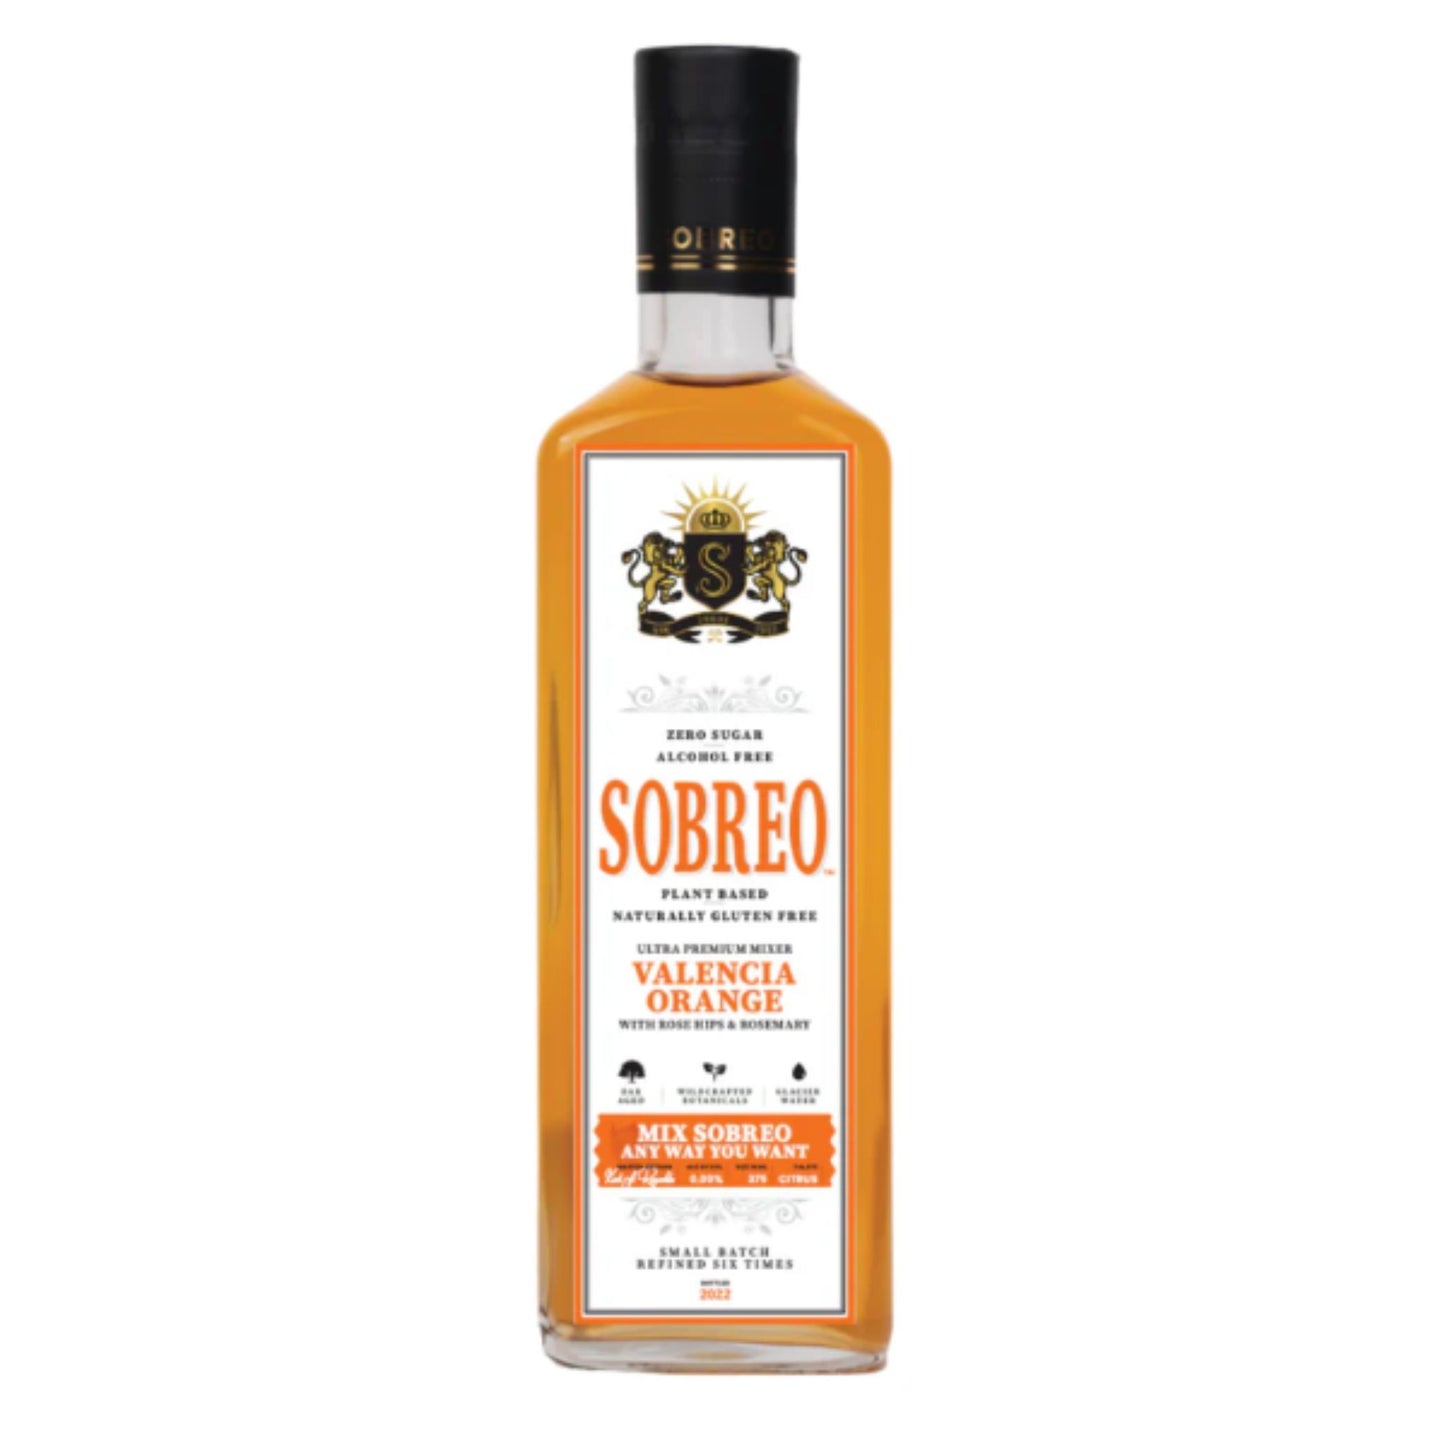 Sobreo Valencia Orange non-alcoholic cocktail mixer is available for sale at Knyota Drinks in Ottawa.